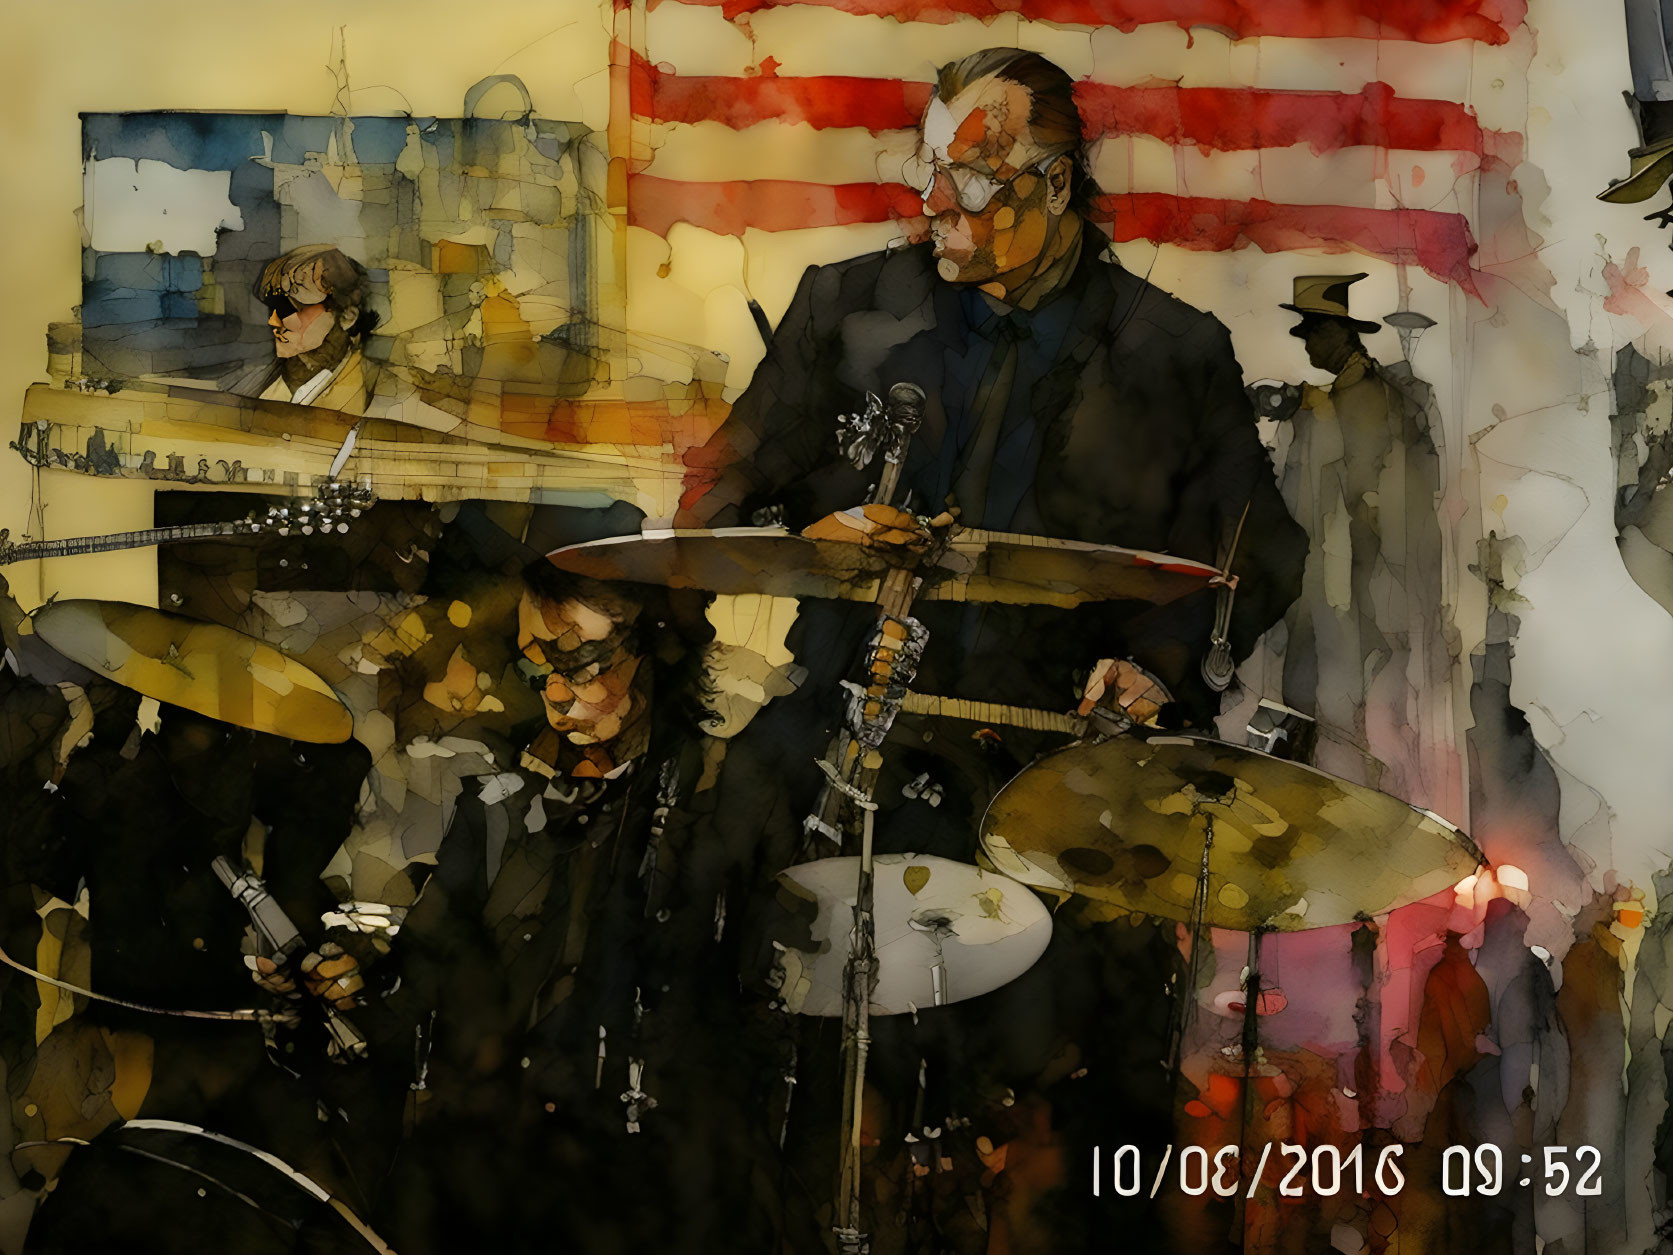 Vivid watercolor band painting with guitarist, drummer, and bassist